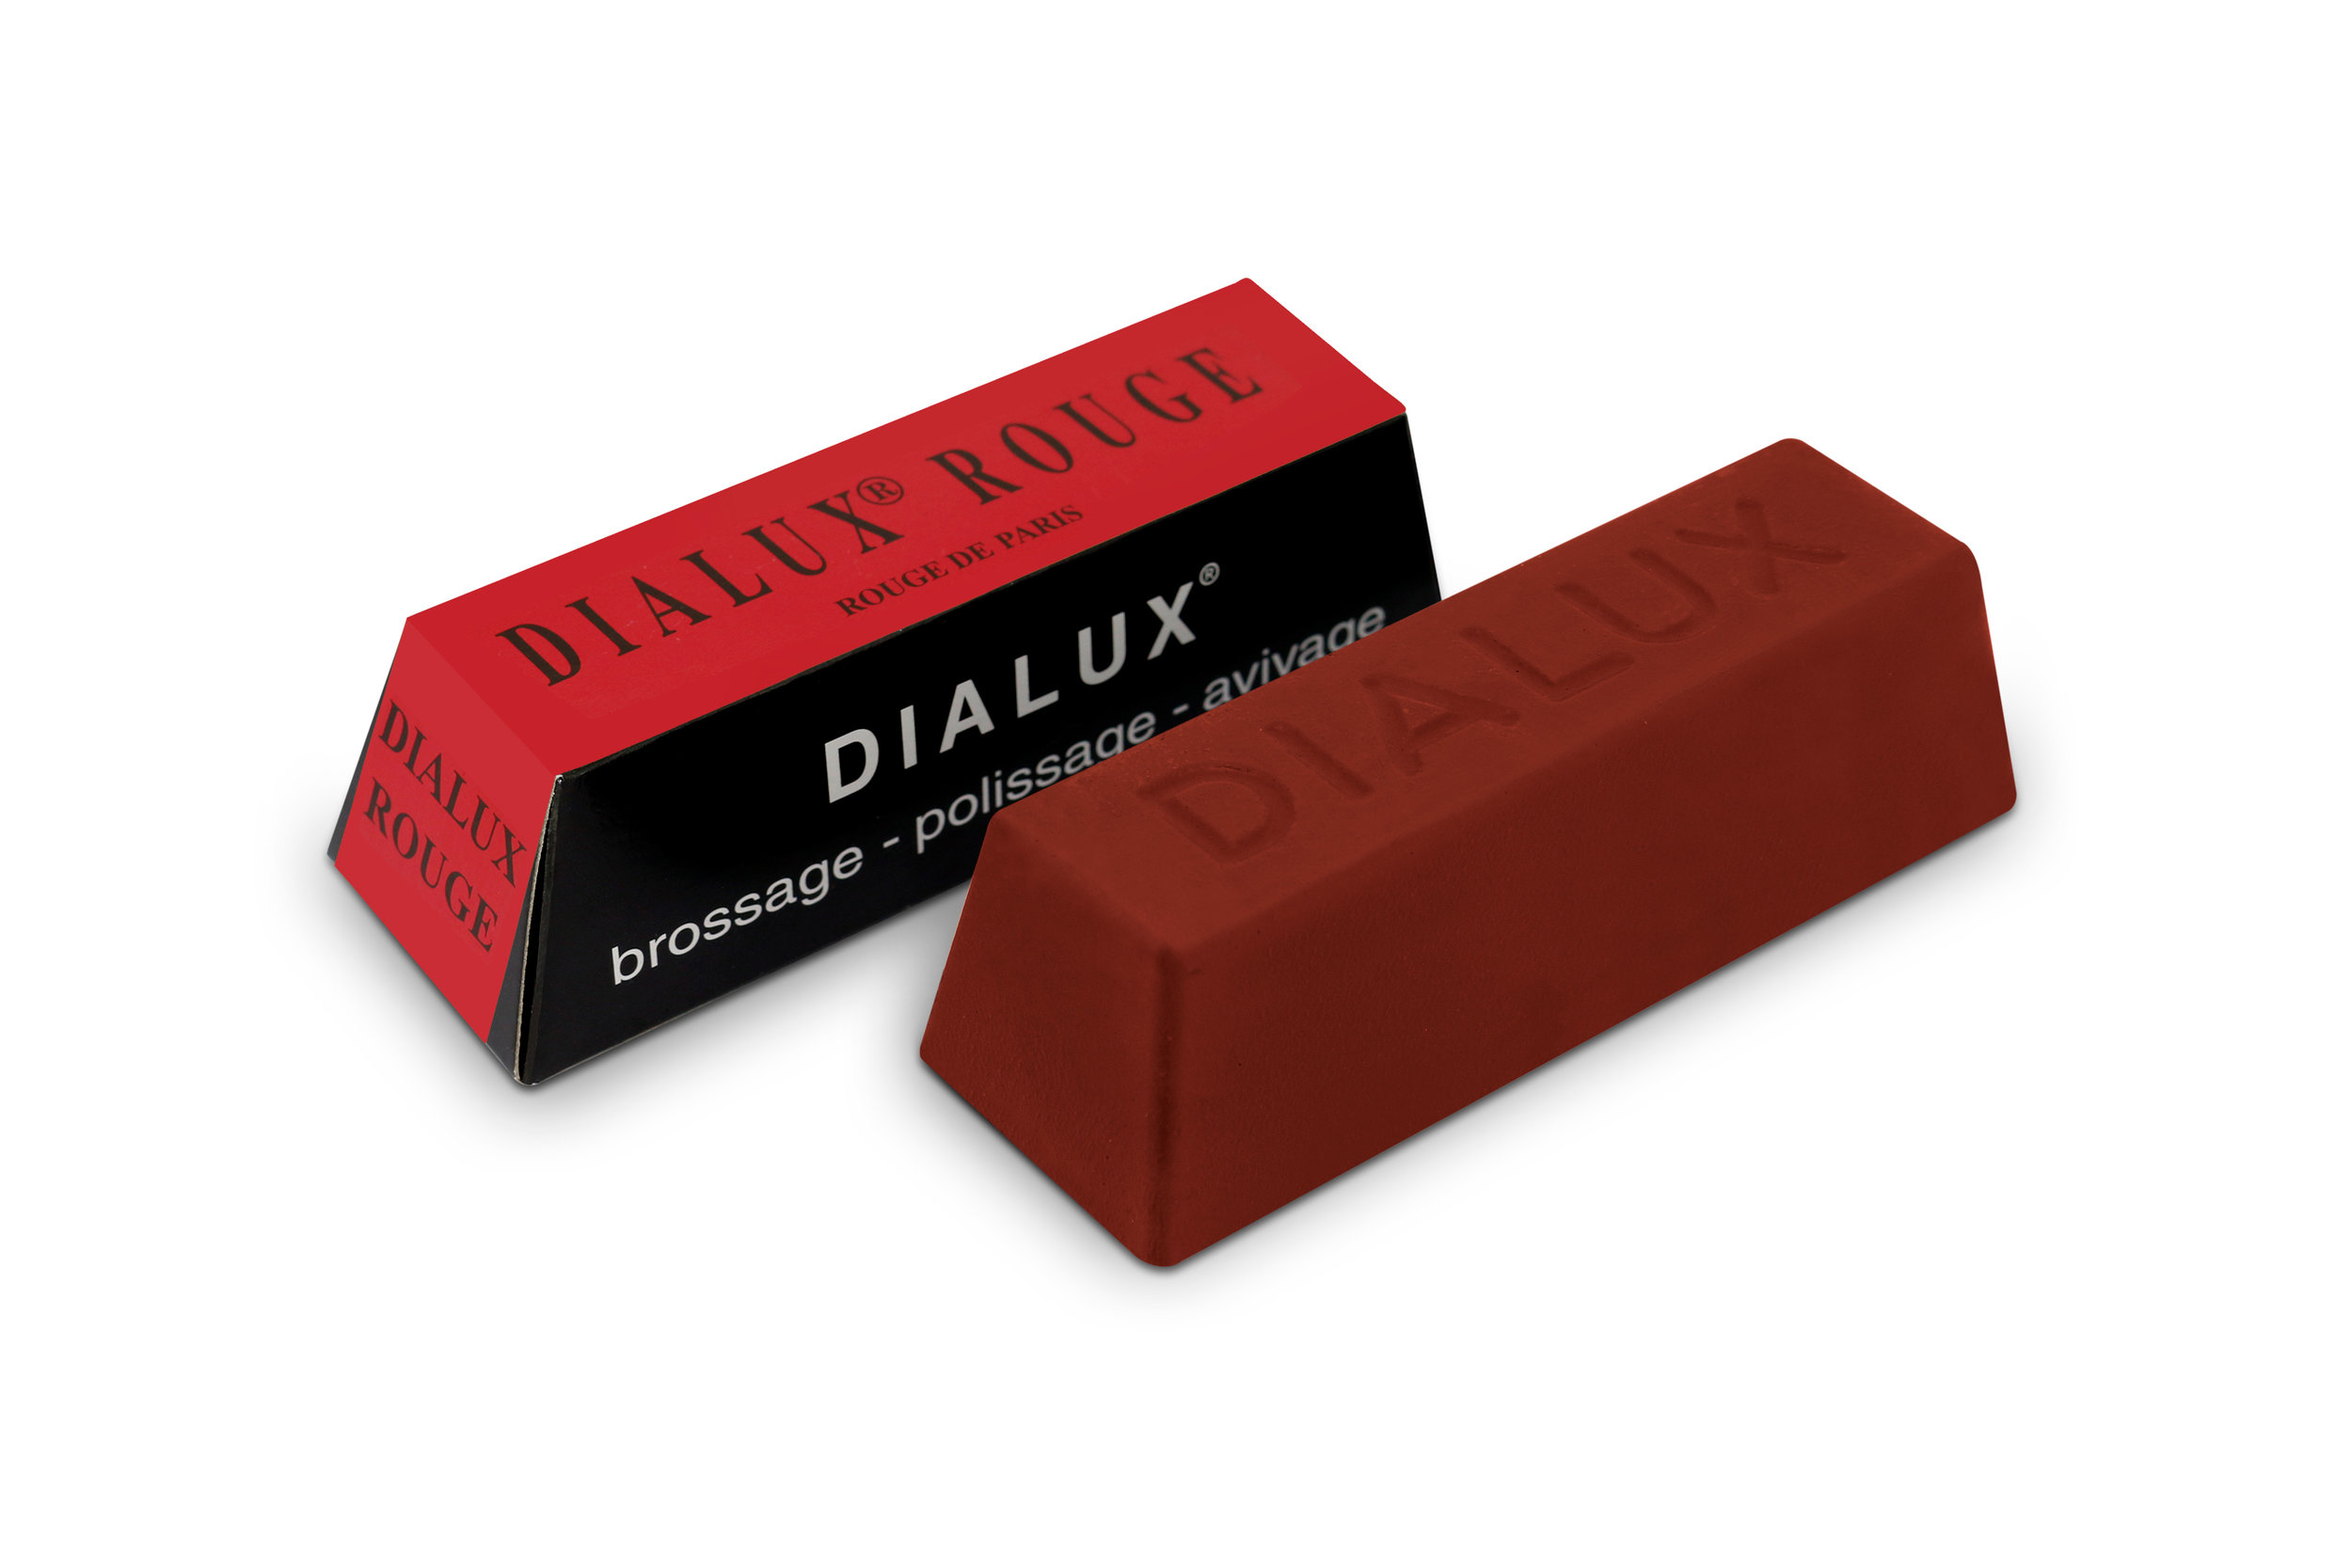 Jewelers Rouge Dialux Polishing Compound White & Blue for White Gold and  Silver